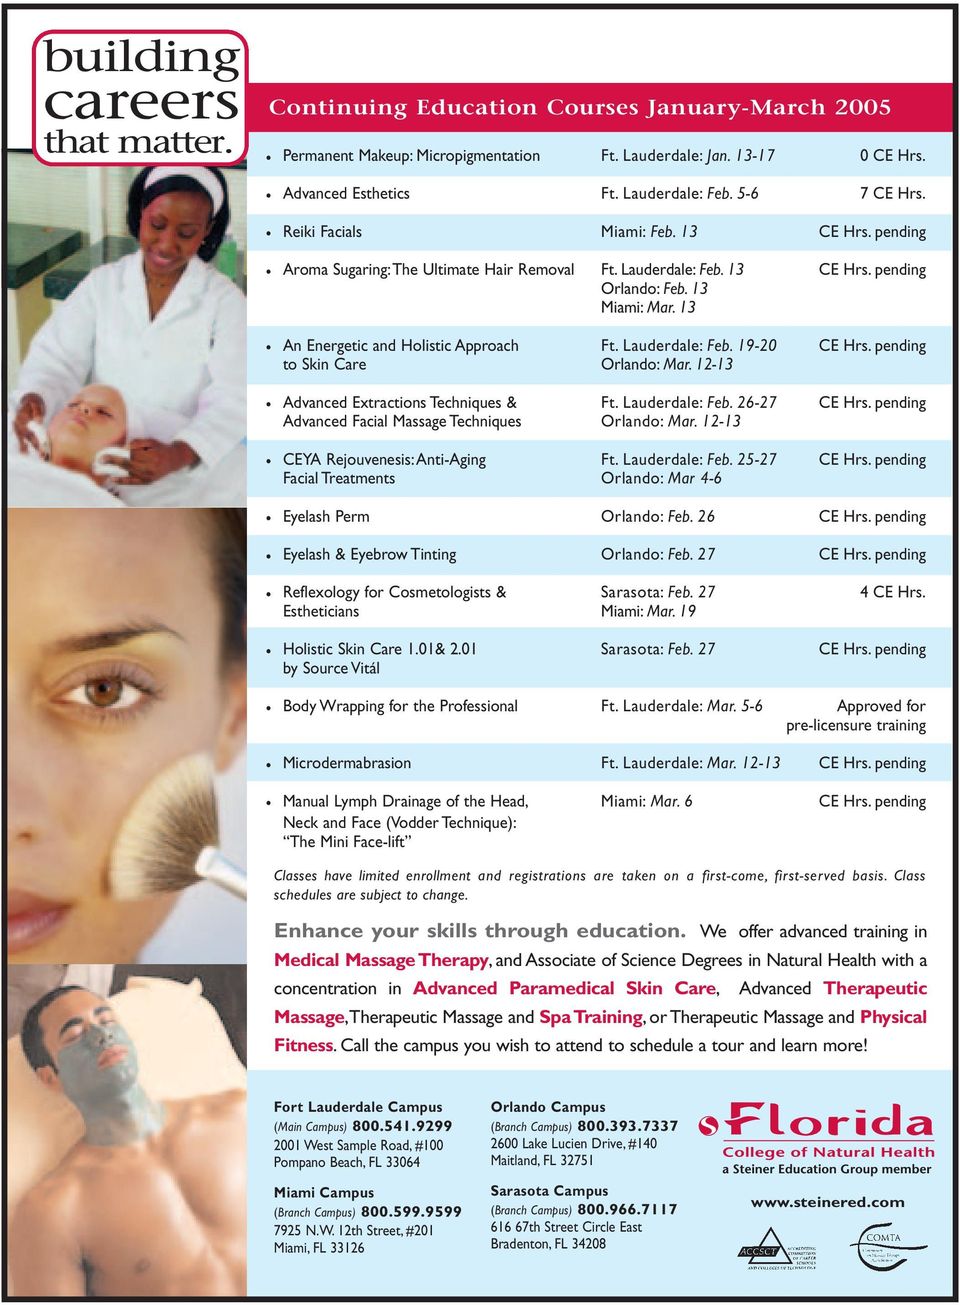 13 An Energetic and Holistic Approach Ft. Lauderdale: Feb. 19-20 CE Hrs. pending to Skin Care Orlando: Mar. 12-13 Advanced Extractions Techniques & Ft. Lauderdale: Feb. 26-27 CE Hrs.